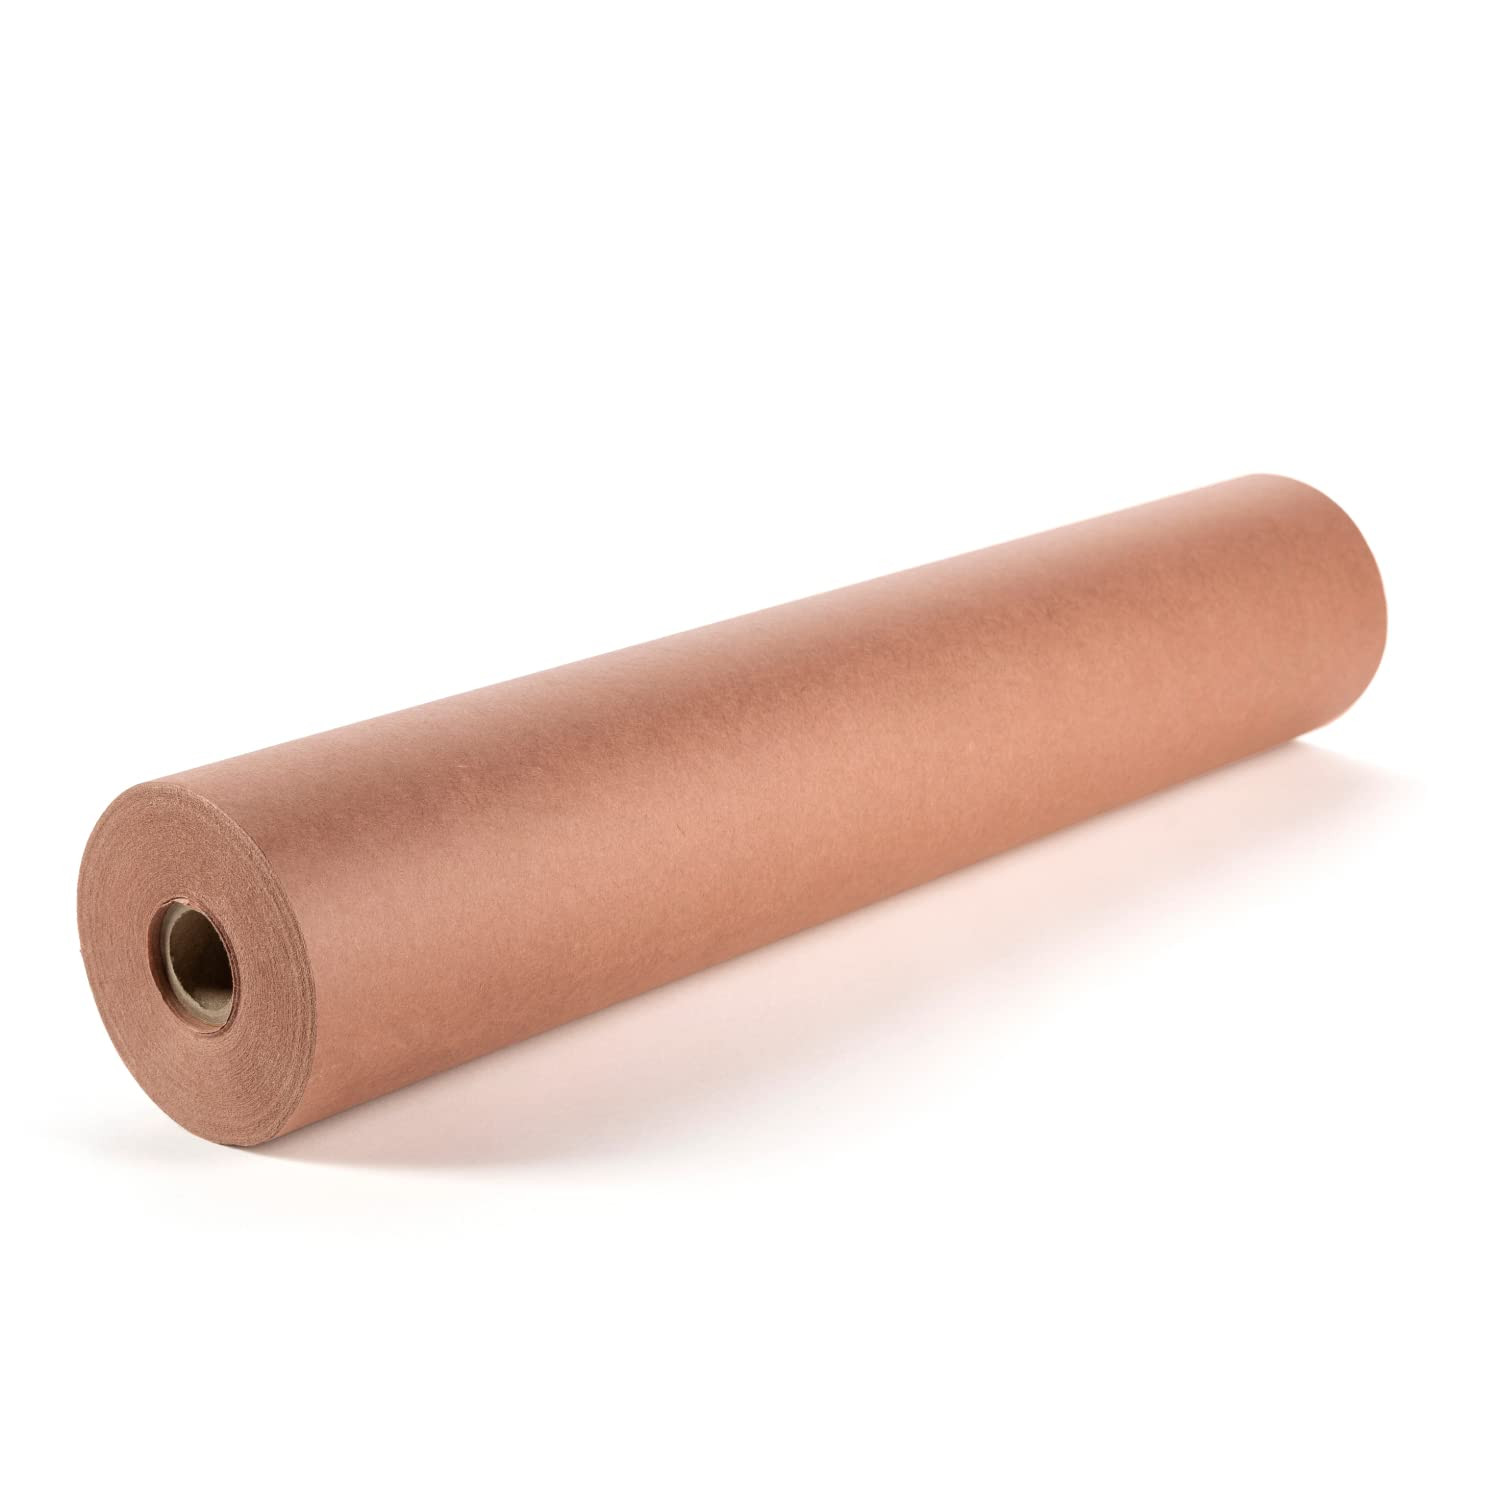 black butcher paper rolls, black butcher paper rolls Suppliers and  Manufacturers at